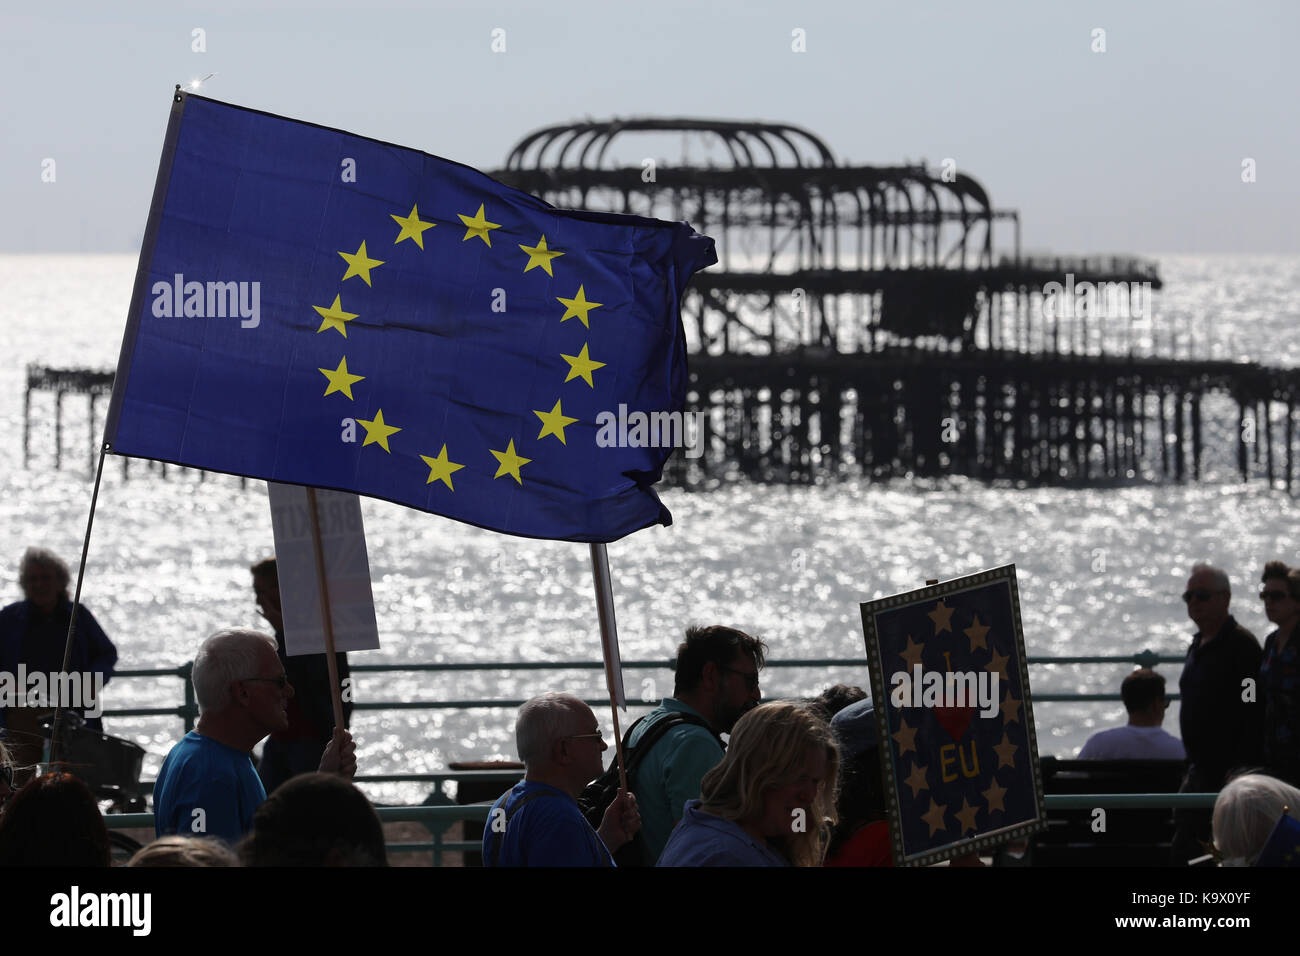 Brighton, UK. 24th September, 2017. Pro European Union supporters demonstrate in front of the West Pier during a protest against Brexit in Brighton, UK, Sunday, September 24, 2017. Protesters rallied outside the annual Labour Party Conference being held in Brighton and attended by the opposition leader Jeremy Corbyn. Photograph : Credit: Luke MacGregor/Alamy Live News Stock Photo